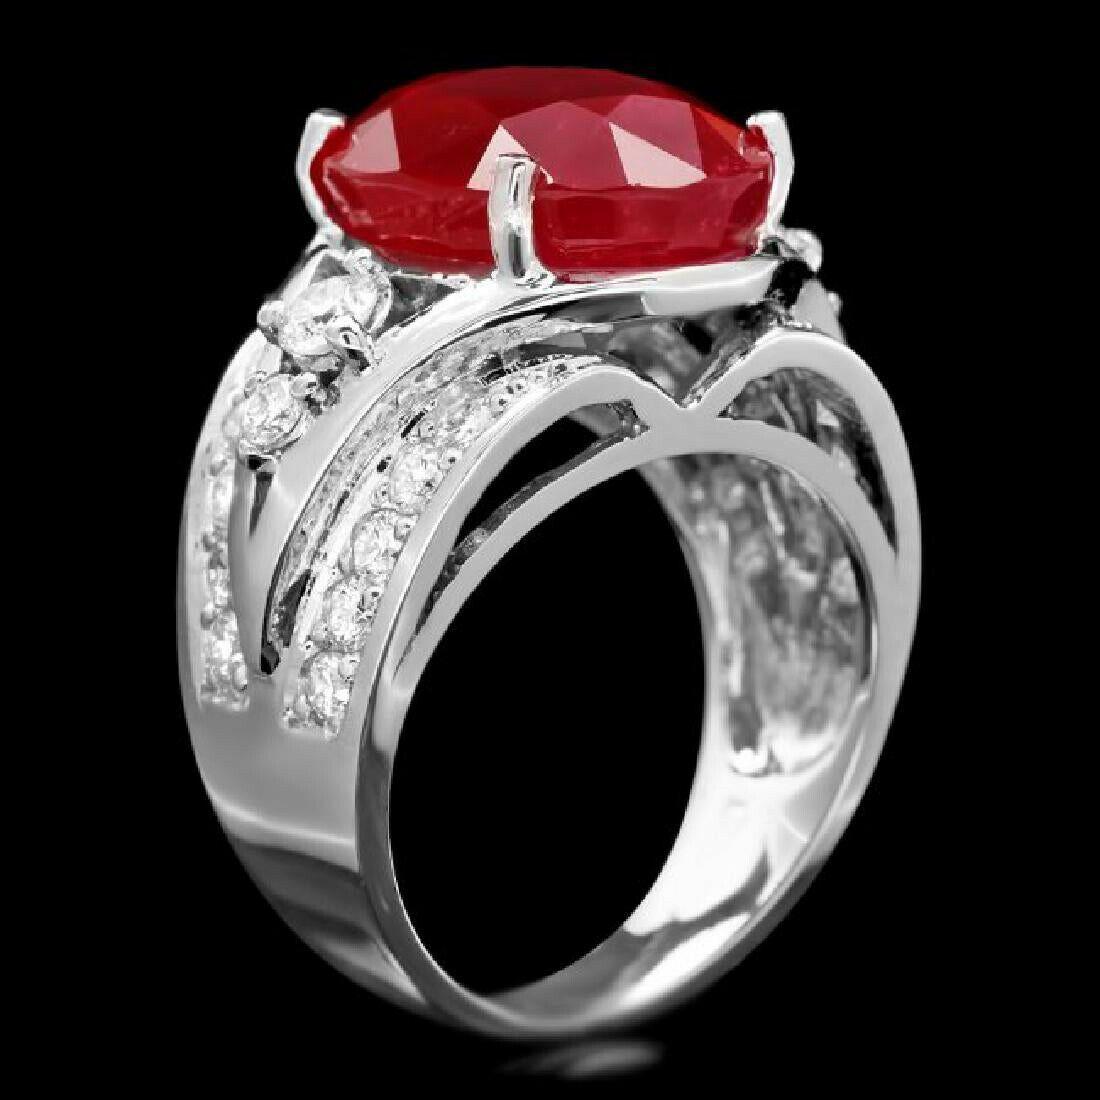 13.10 Carats Impressive Natural Red Ruby and Diamond 14K White Gold Ring

Total Red Ruby Weight is Approx. 12.00 Carats (Lead Glass Filled)

Ruby Measures: Approx. 14.00 x 11.00mm

Natural Round Diamonds Weight: Approx. 1.10 Carats (color G-H /